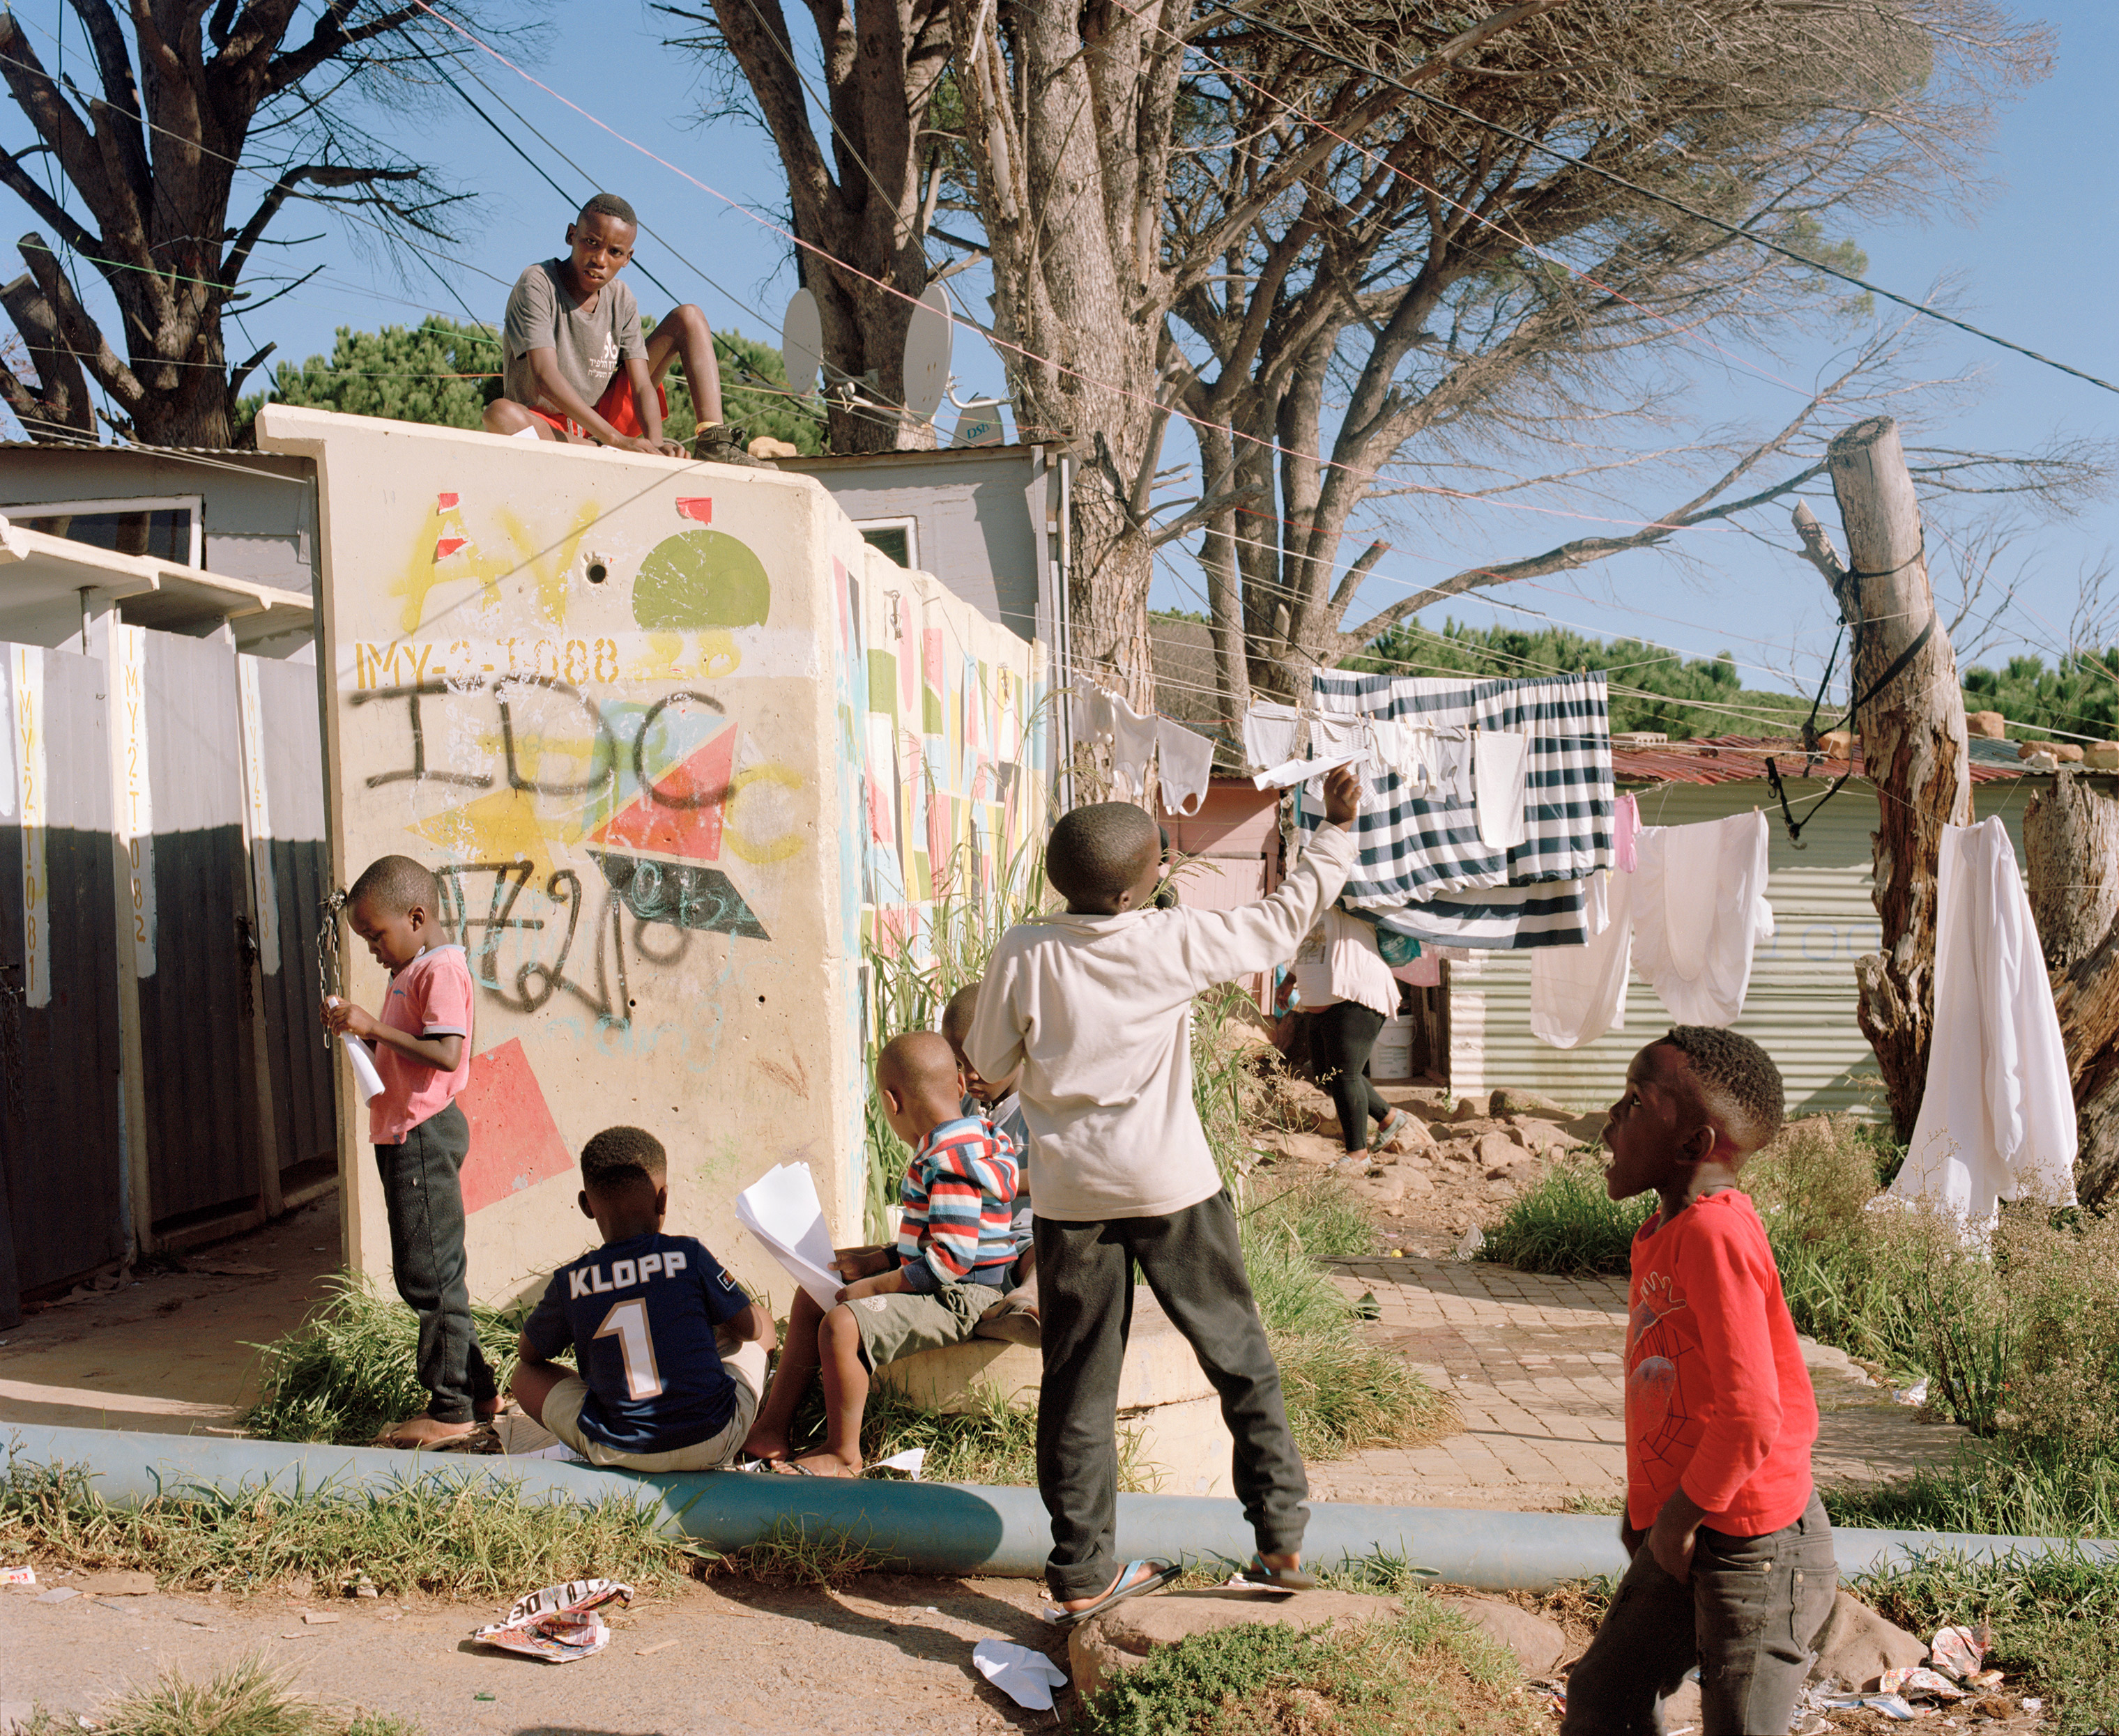 There are 2,700 informal settlements like Imizamo Yethu across the country. (Sarah Nankin for TIME)